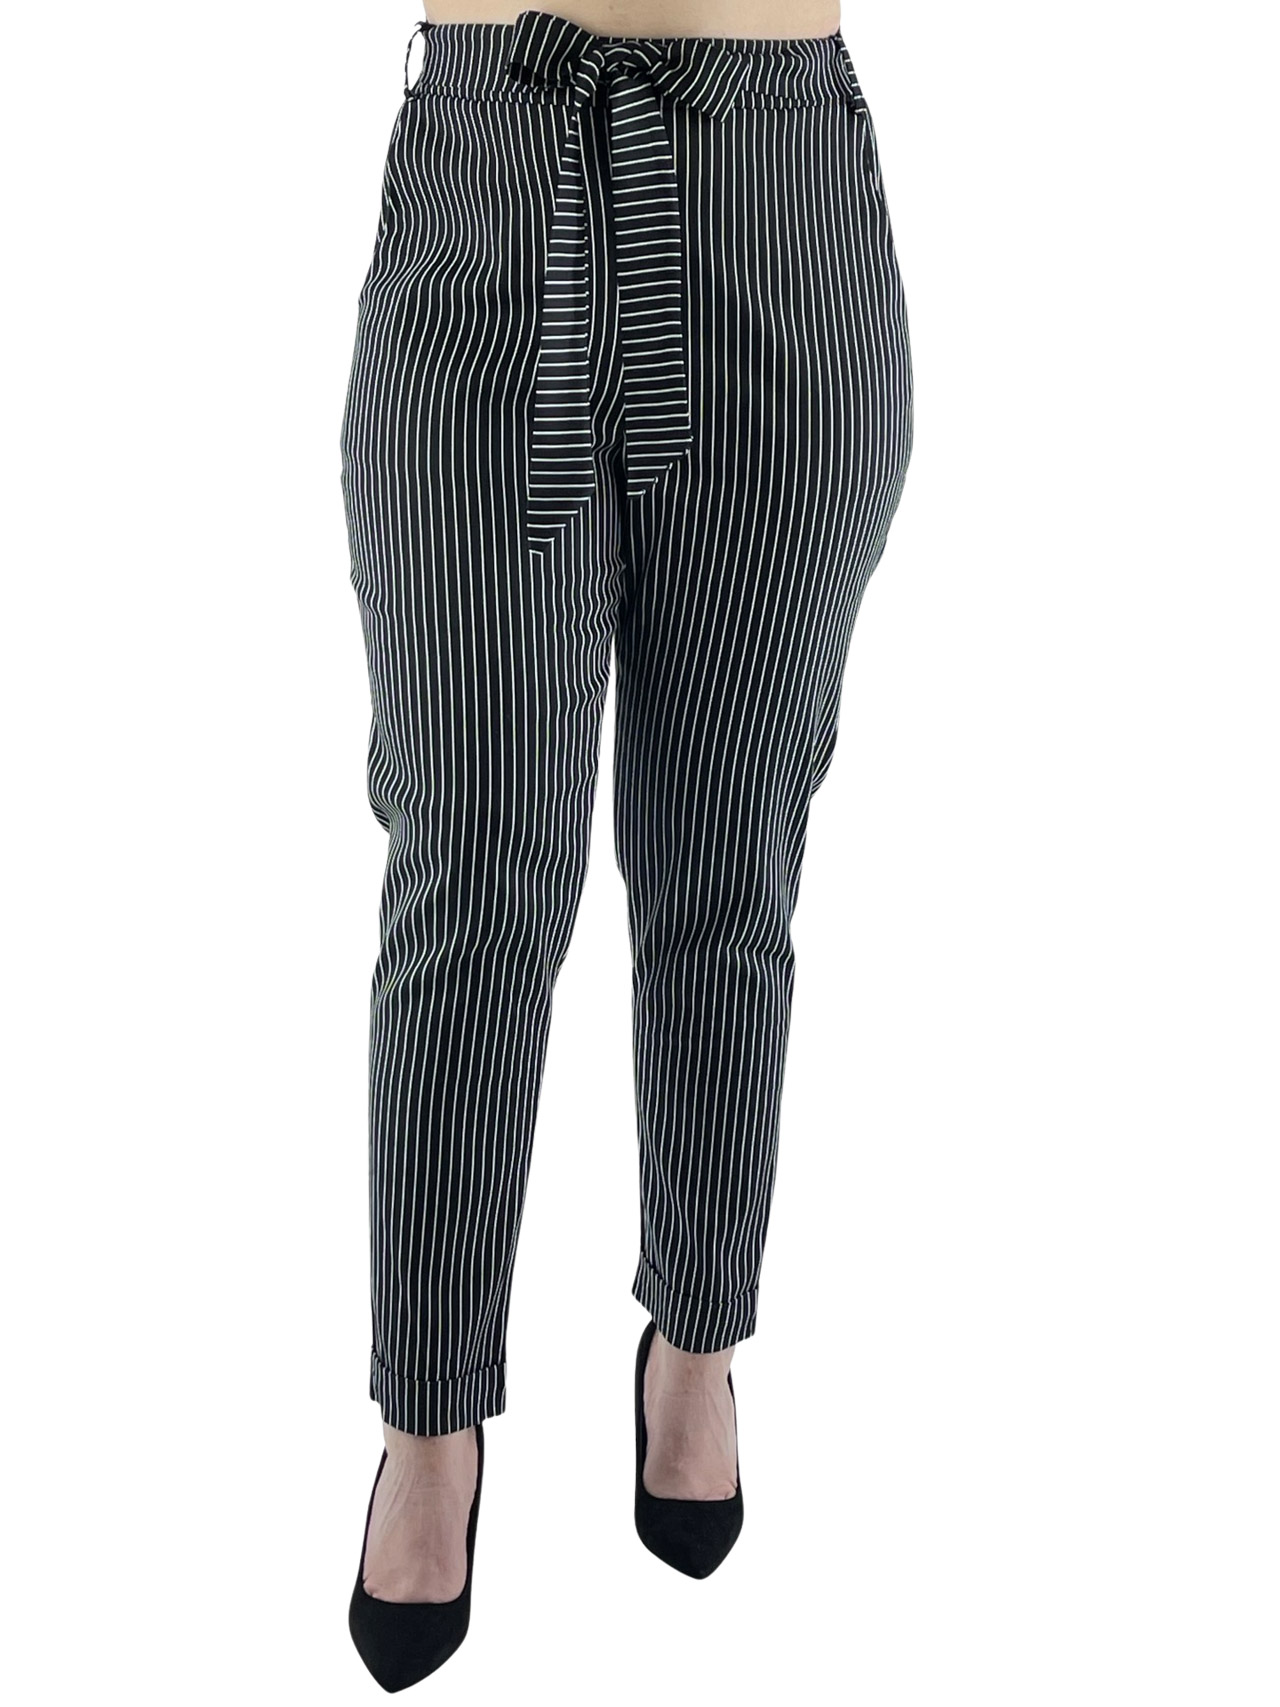 Striped pants with belt female code 022111001